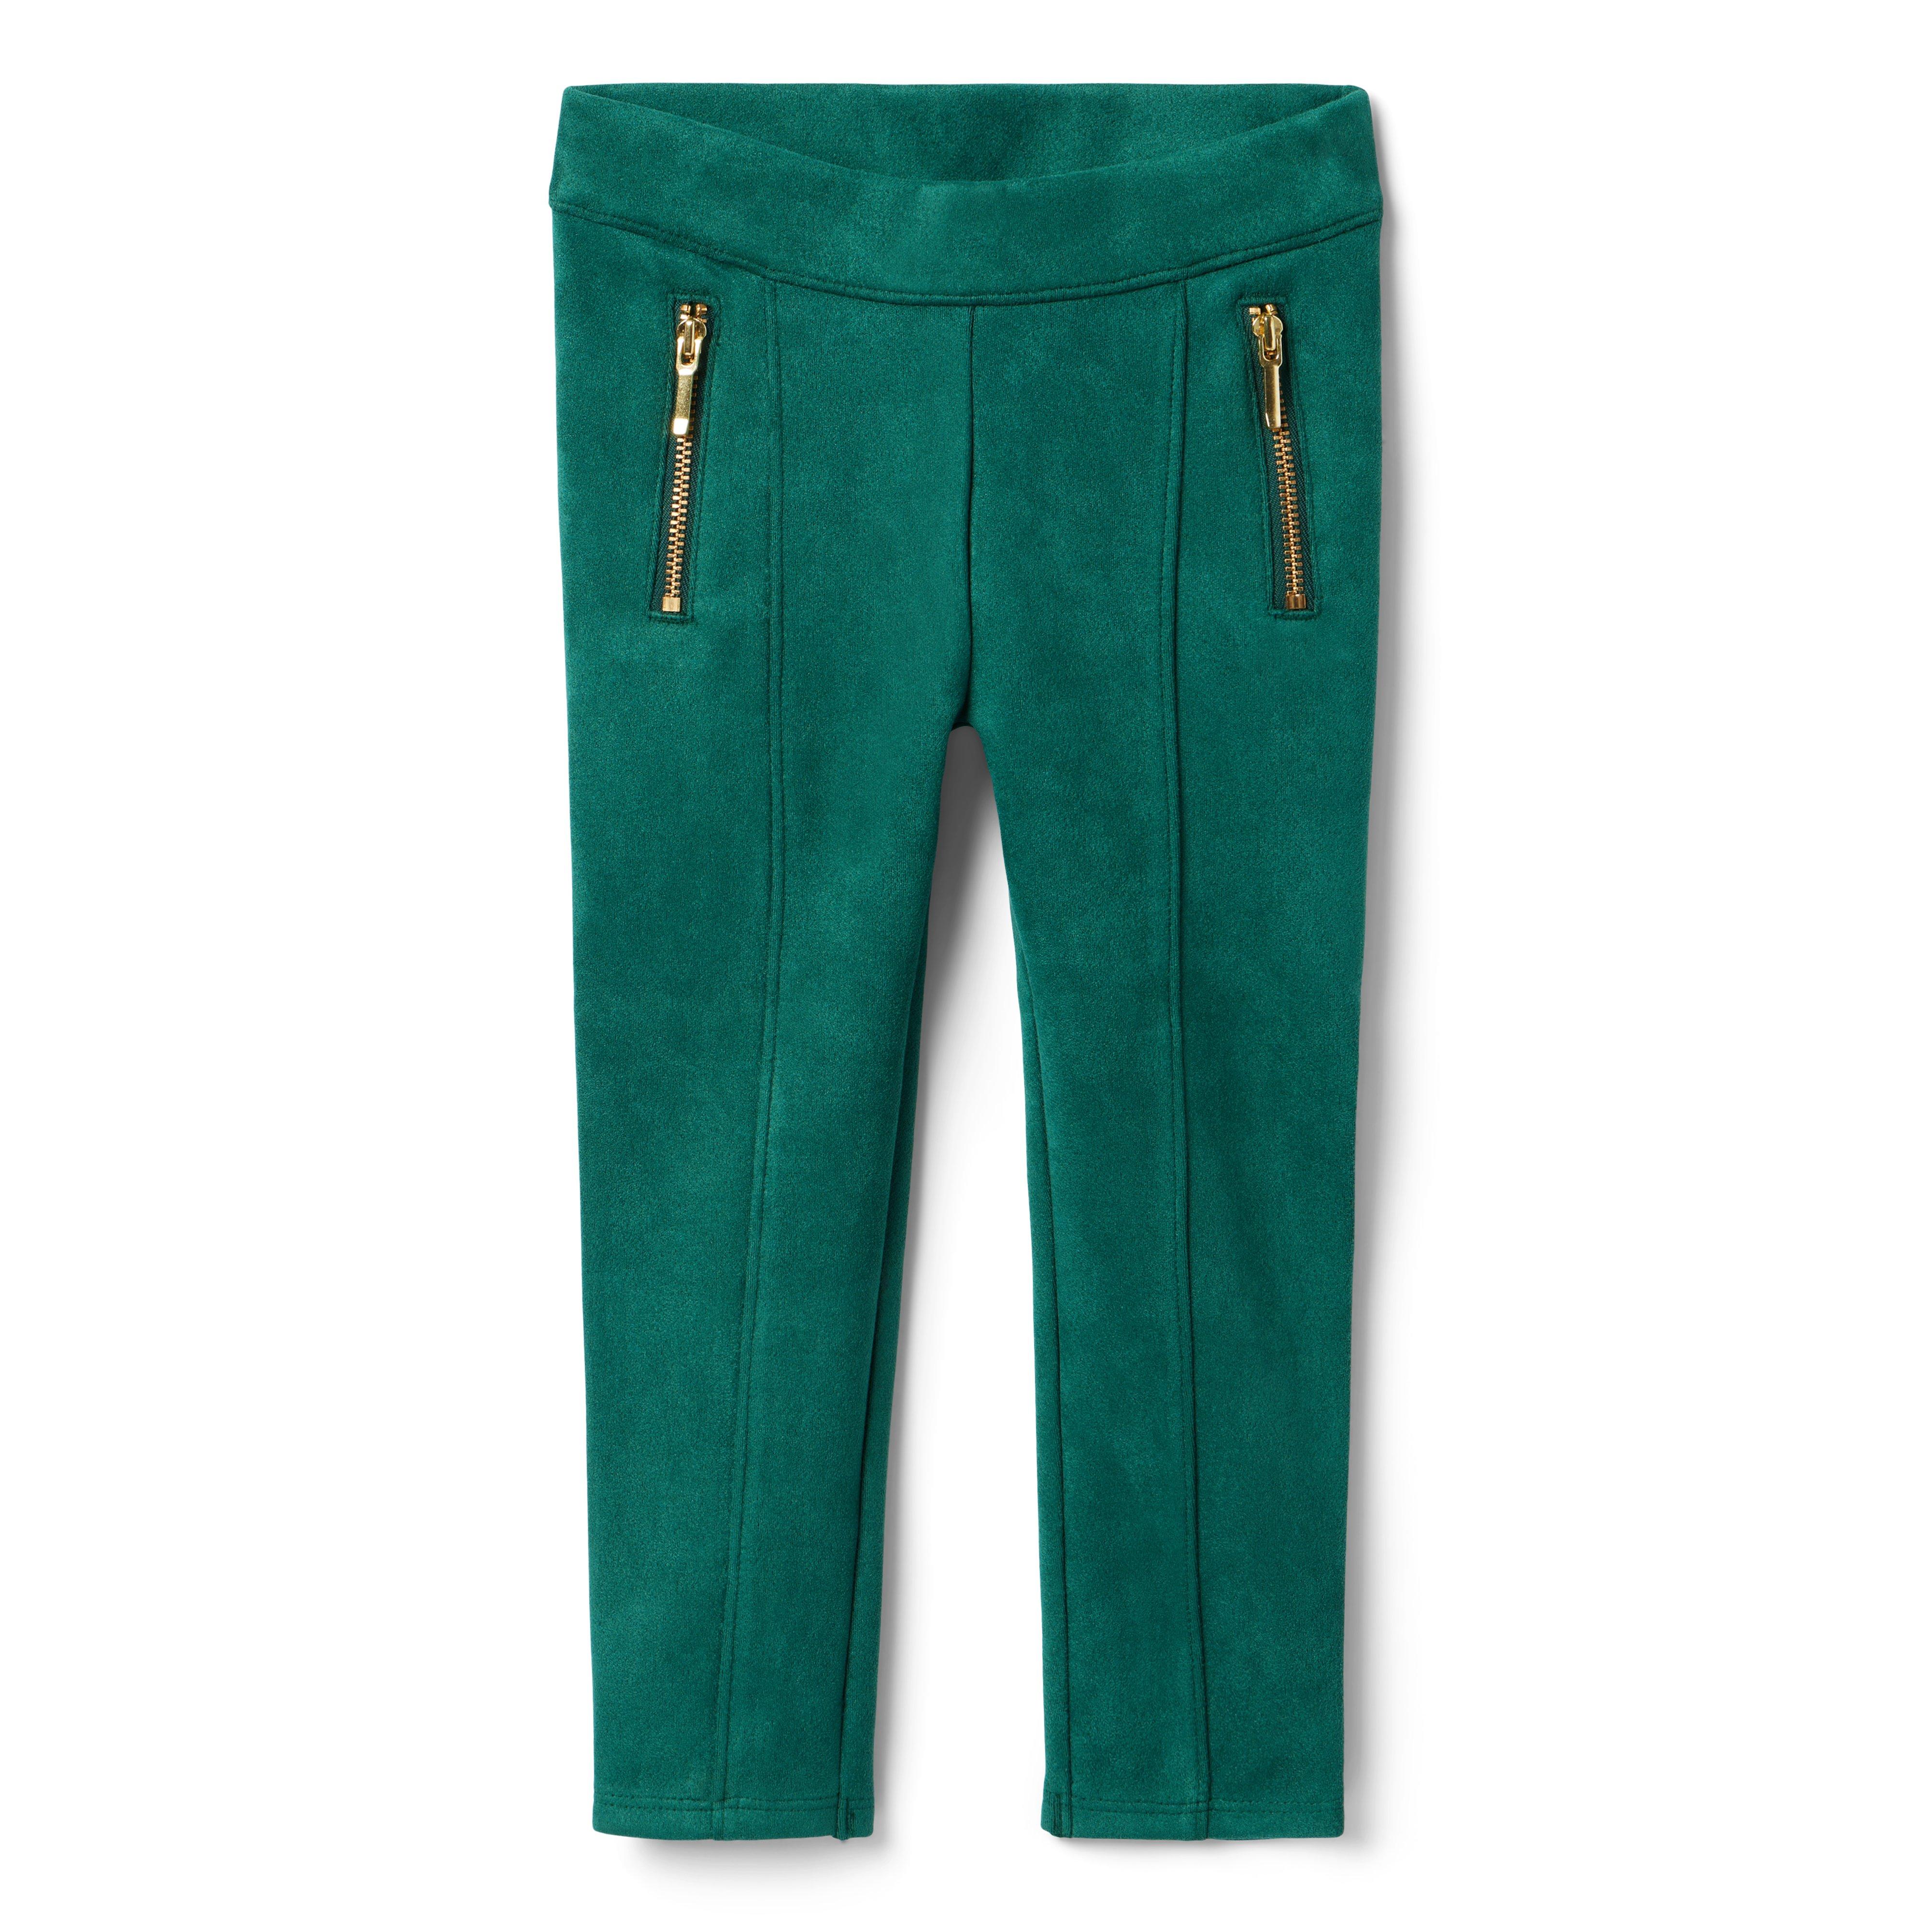 The Sueded City Pant